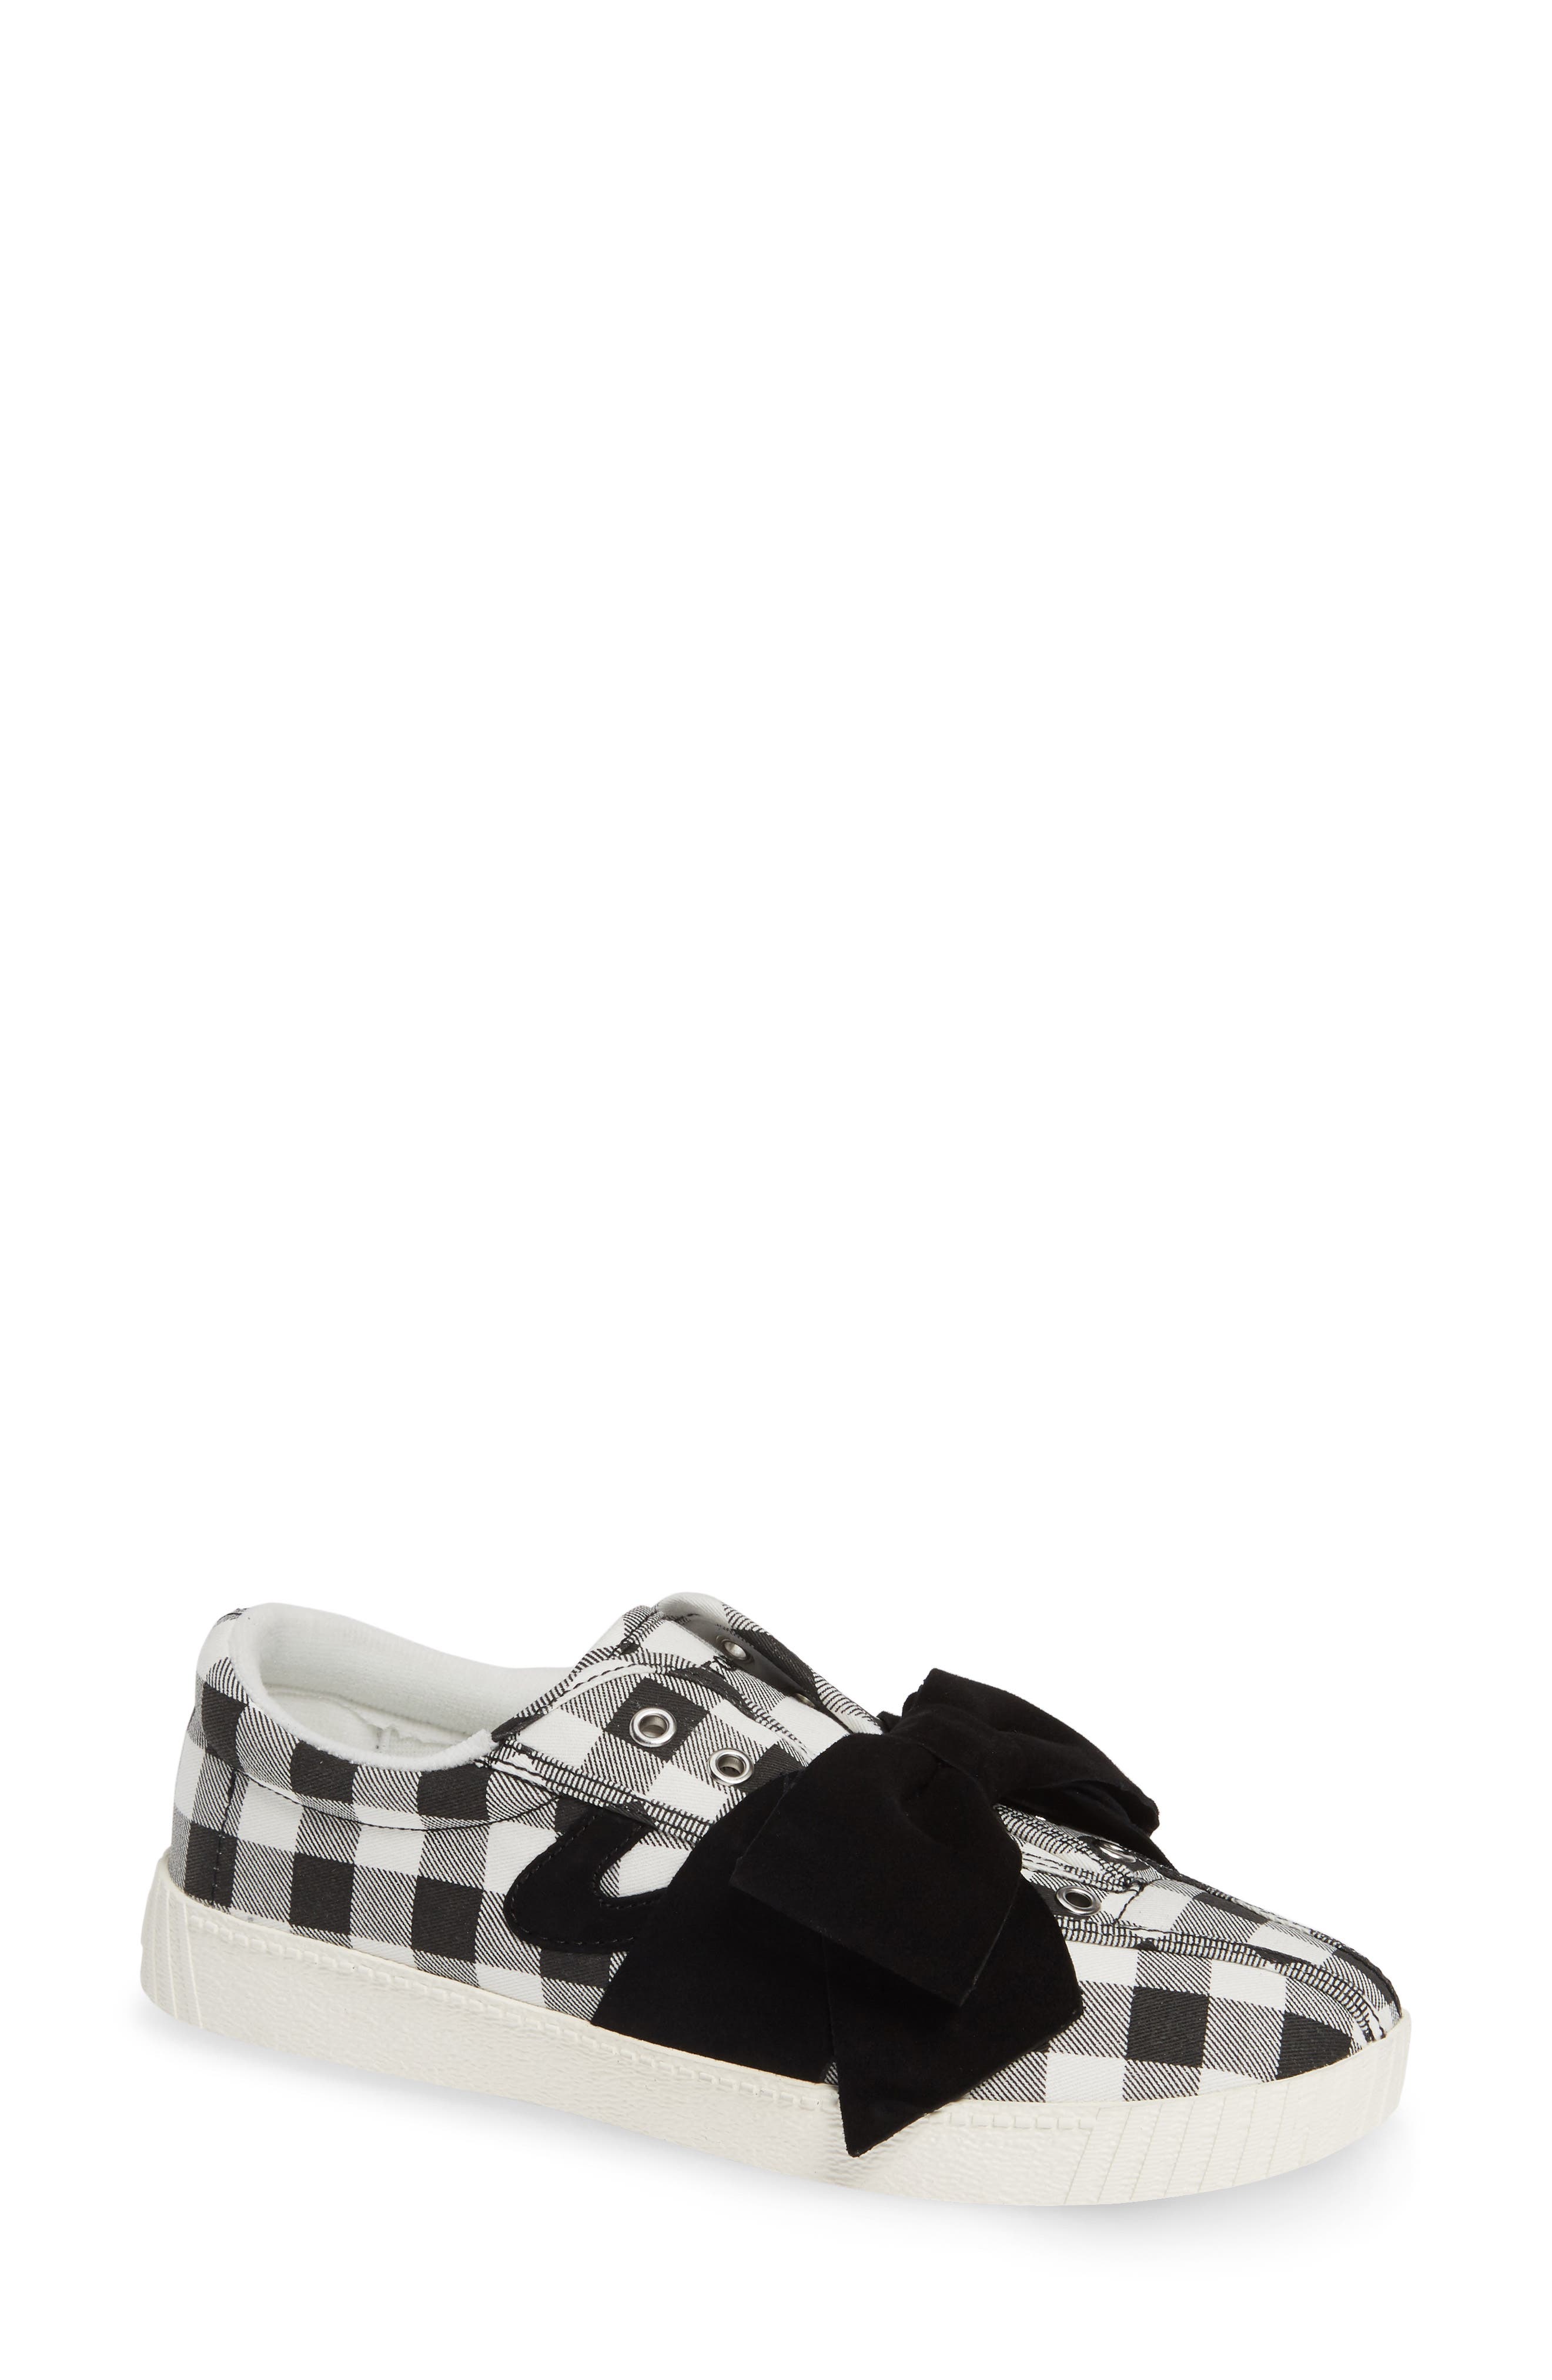 tretorn nylite bow sneakers